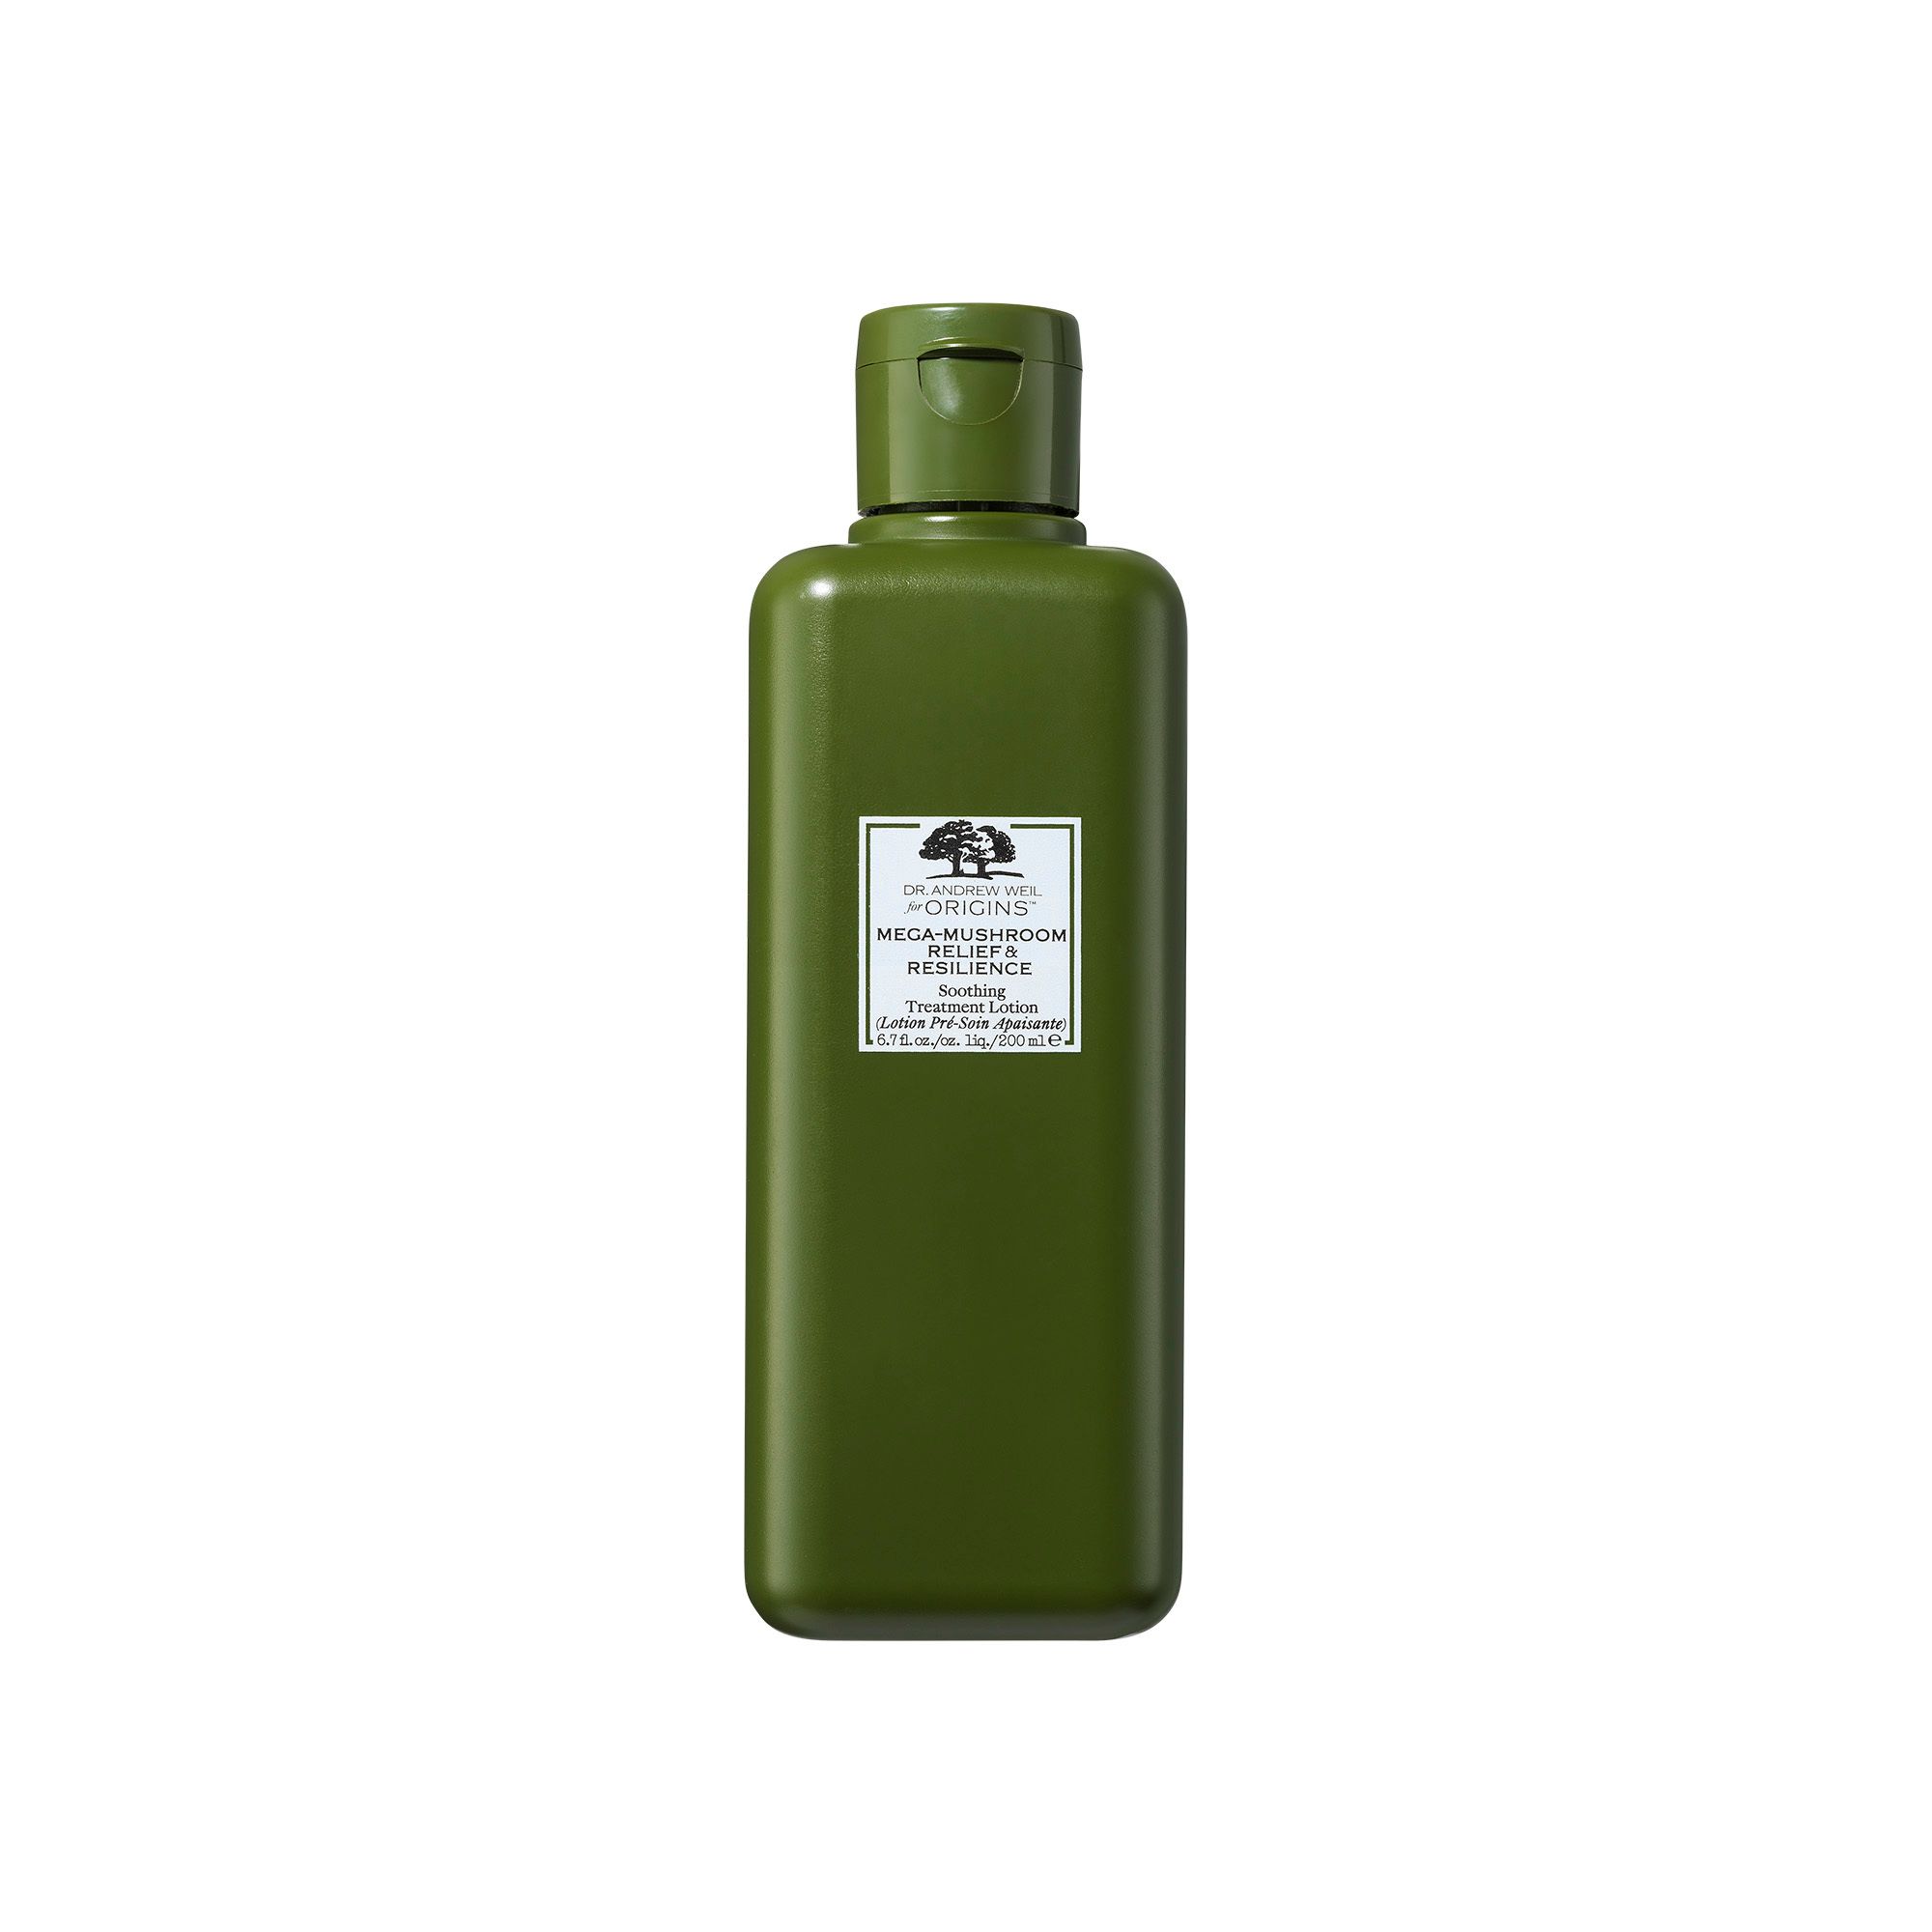 DR. Andrew Weil FOR Origins™ Lotion Tonique Apaisante Mega-Mushroom Relief & Resilience